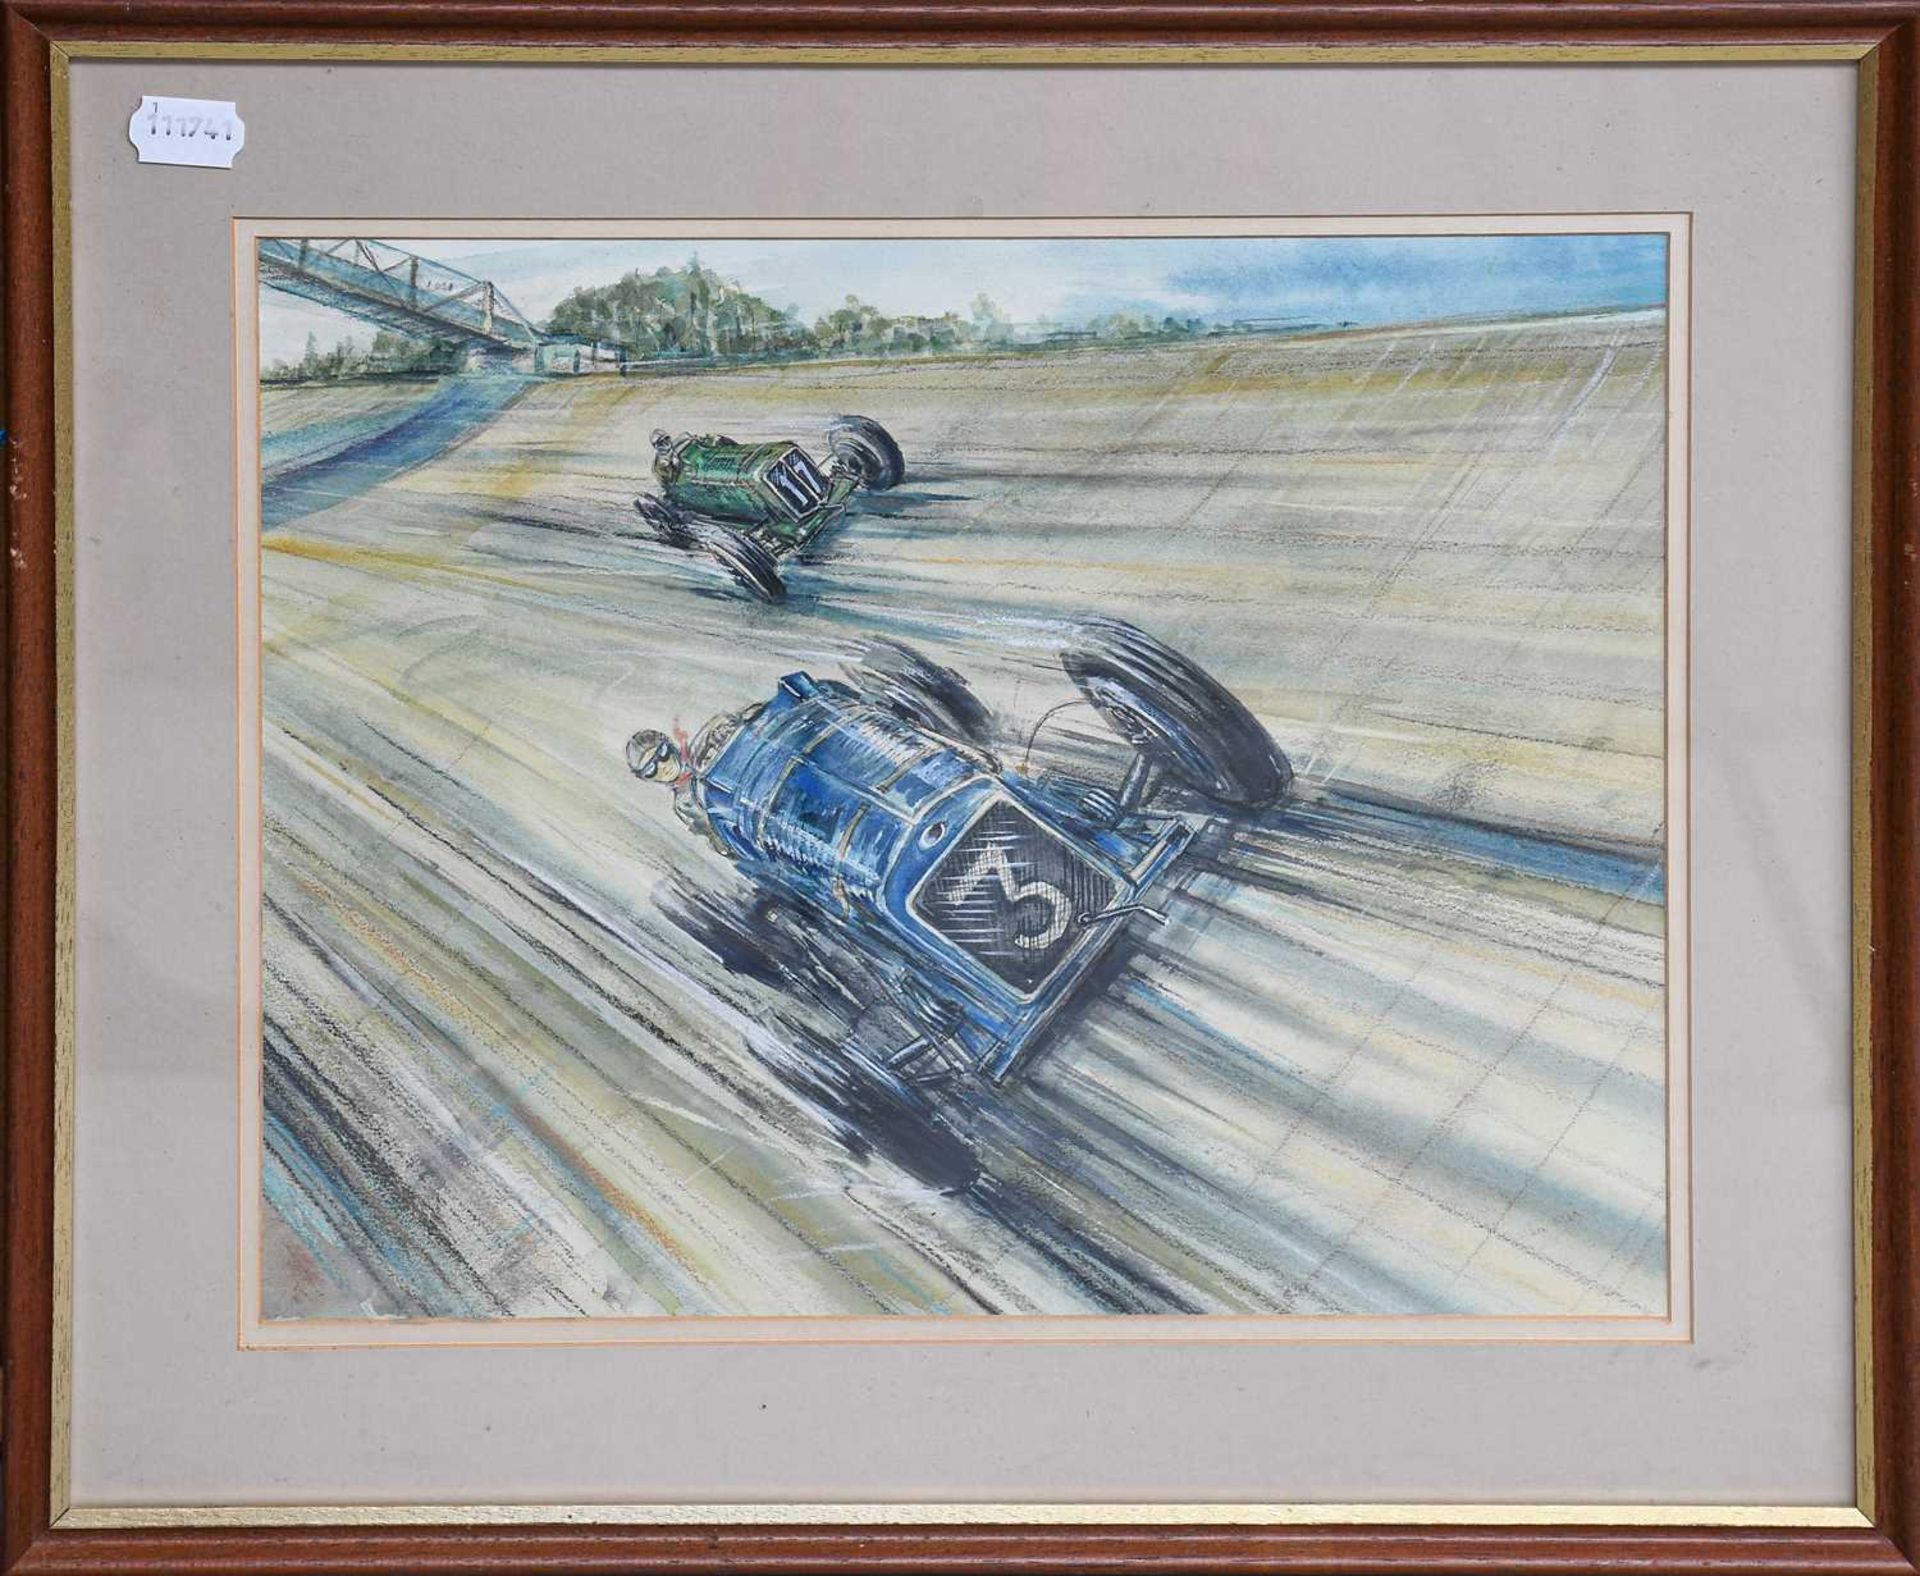 Phil May (b. 1925)"Delage at Brooklands"Watercolour, 32cm by 40cm